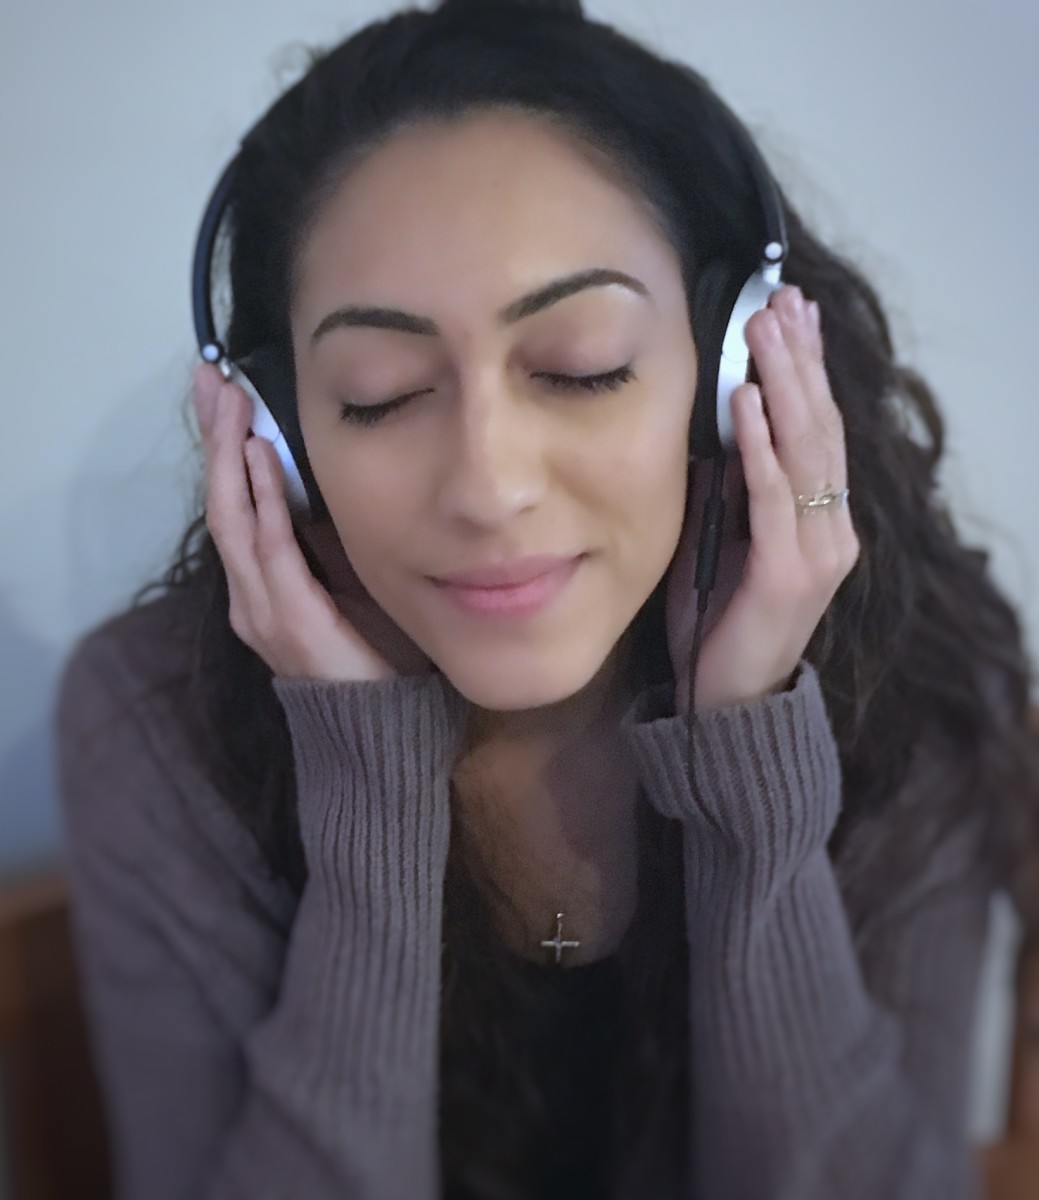 Listening to positive music allows for self-reflection, improving our mood. 